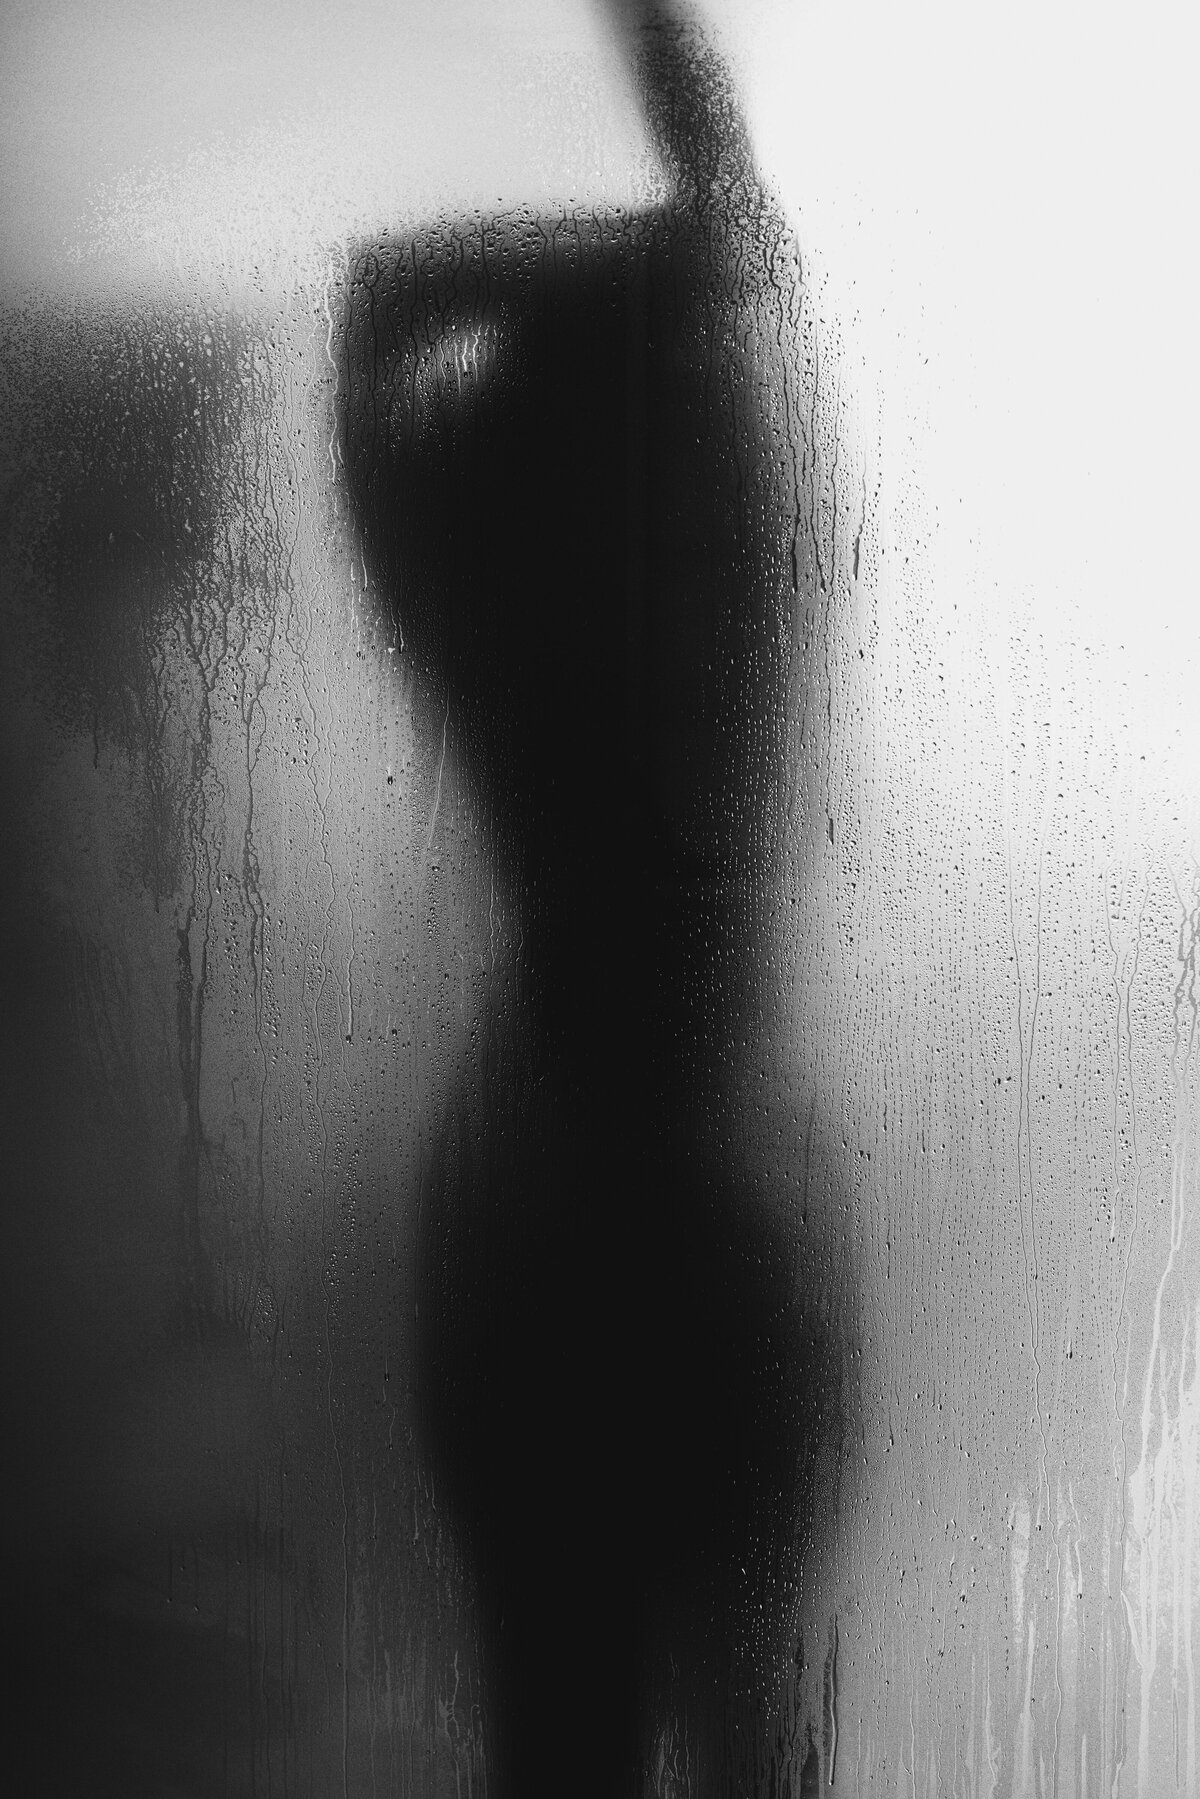 Plus sized female silhouette behind a shower door